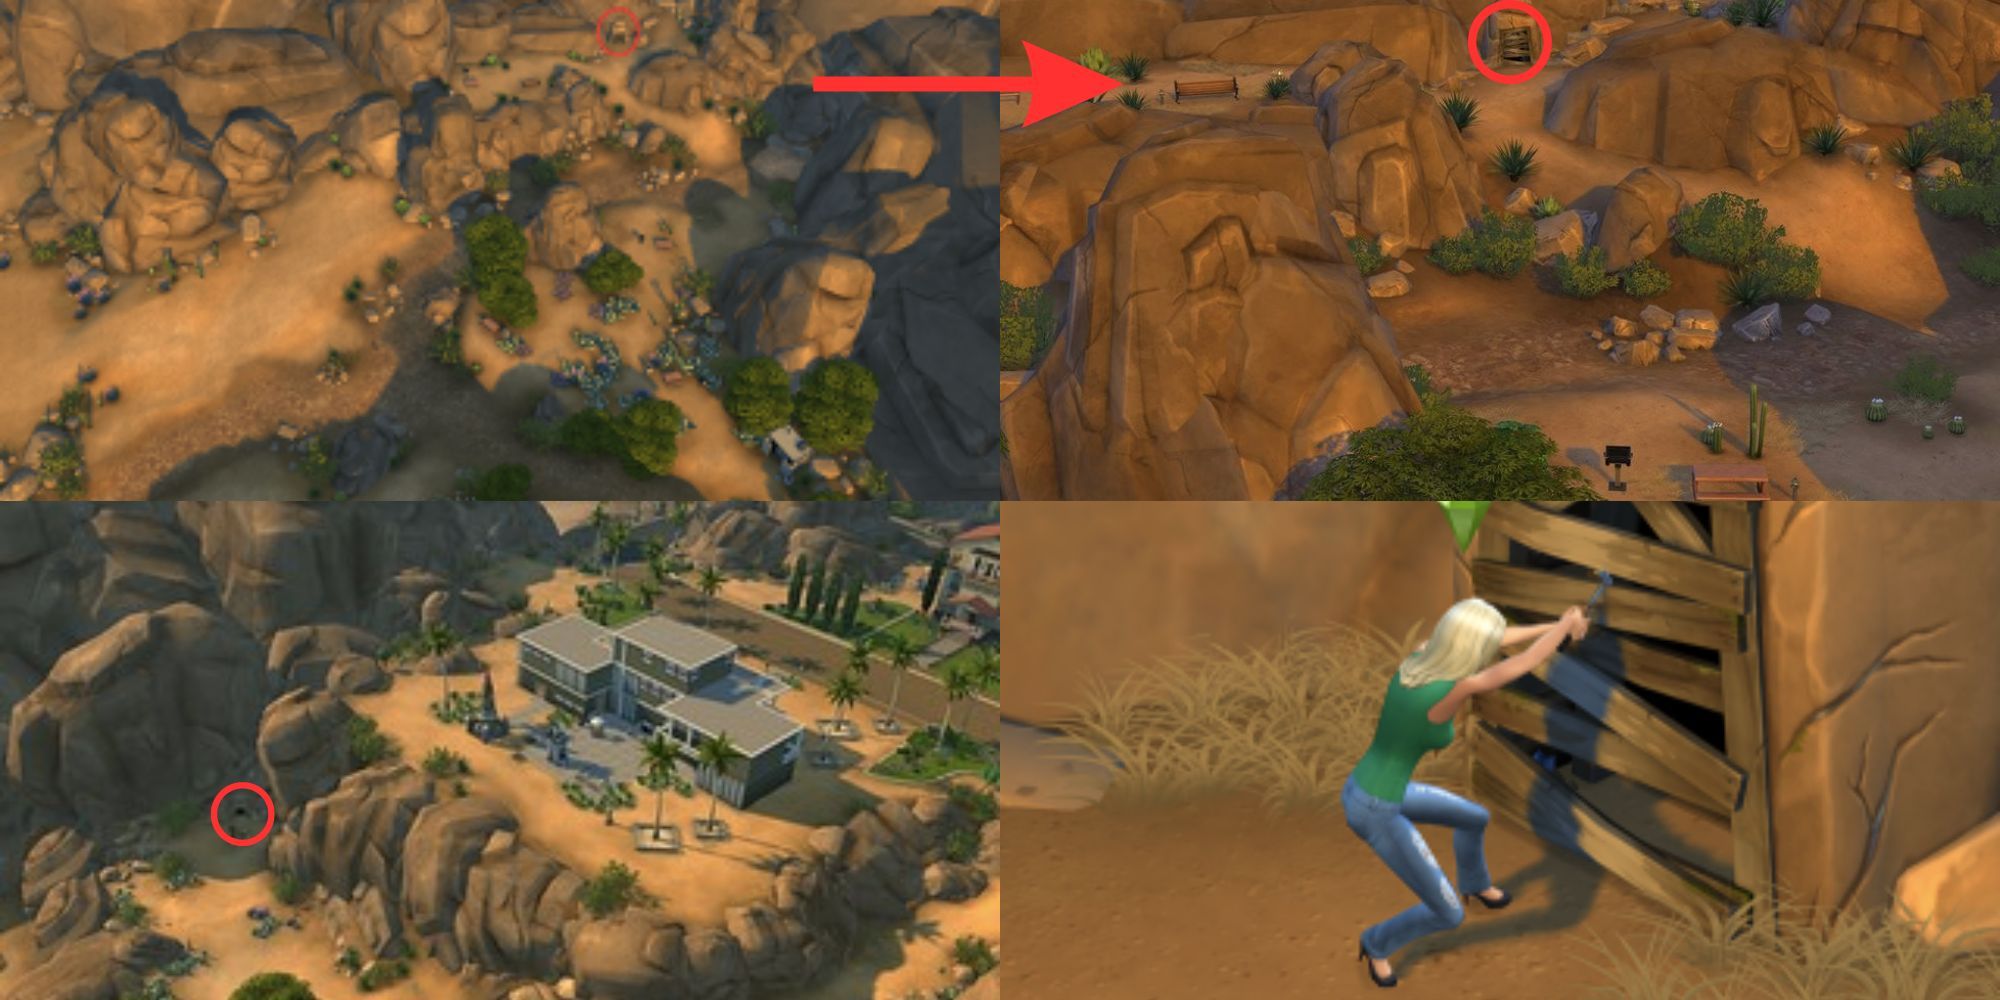 The Sims 4 Forgotten Grotto Abandoned Mine Locations